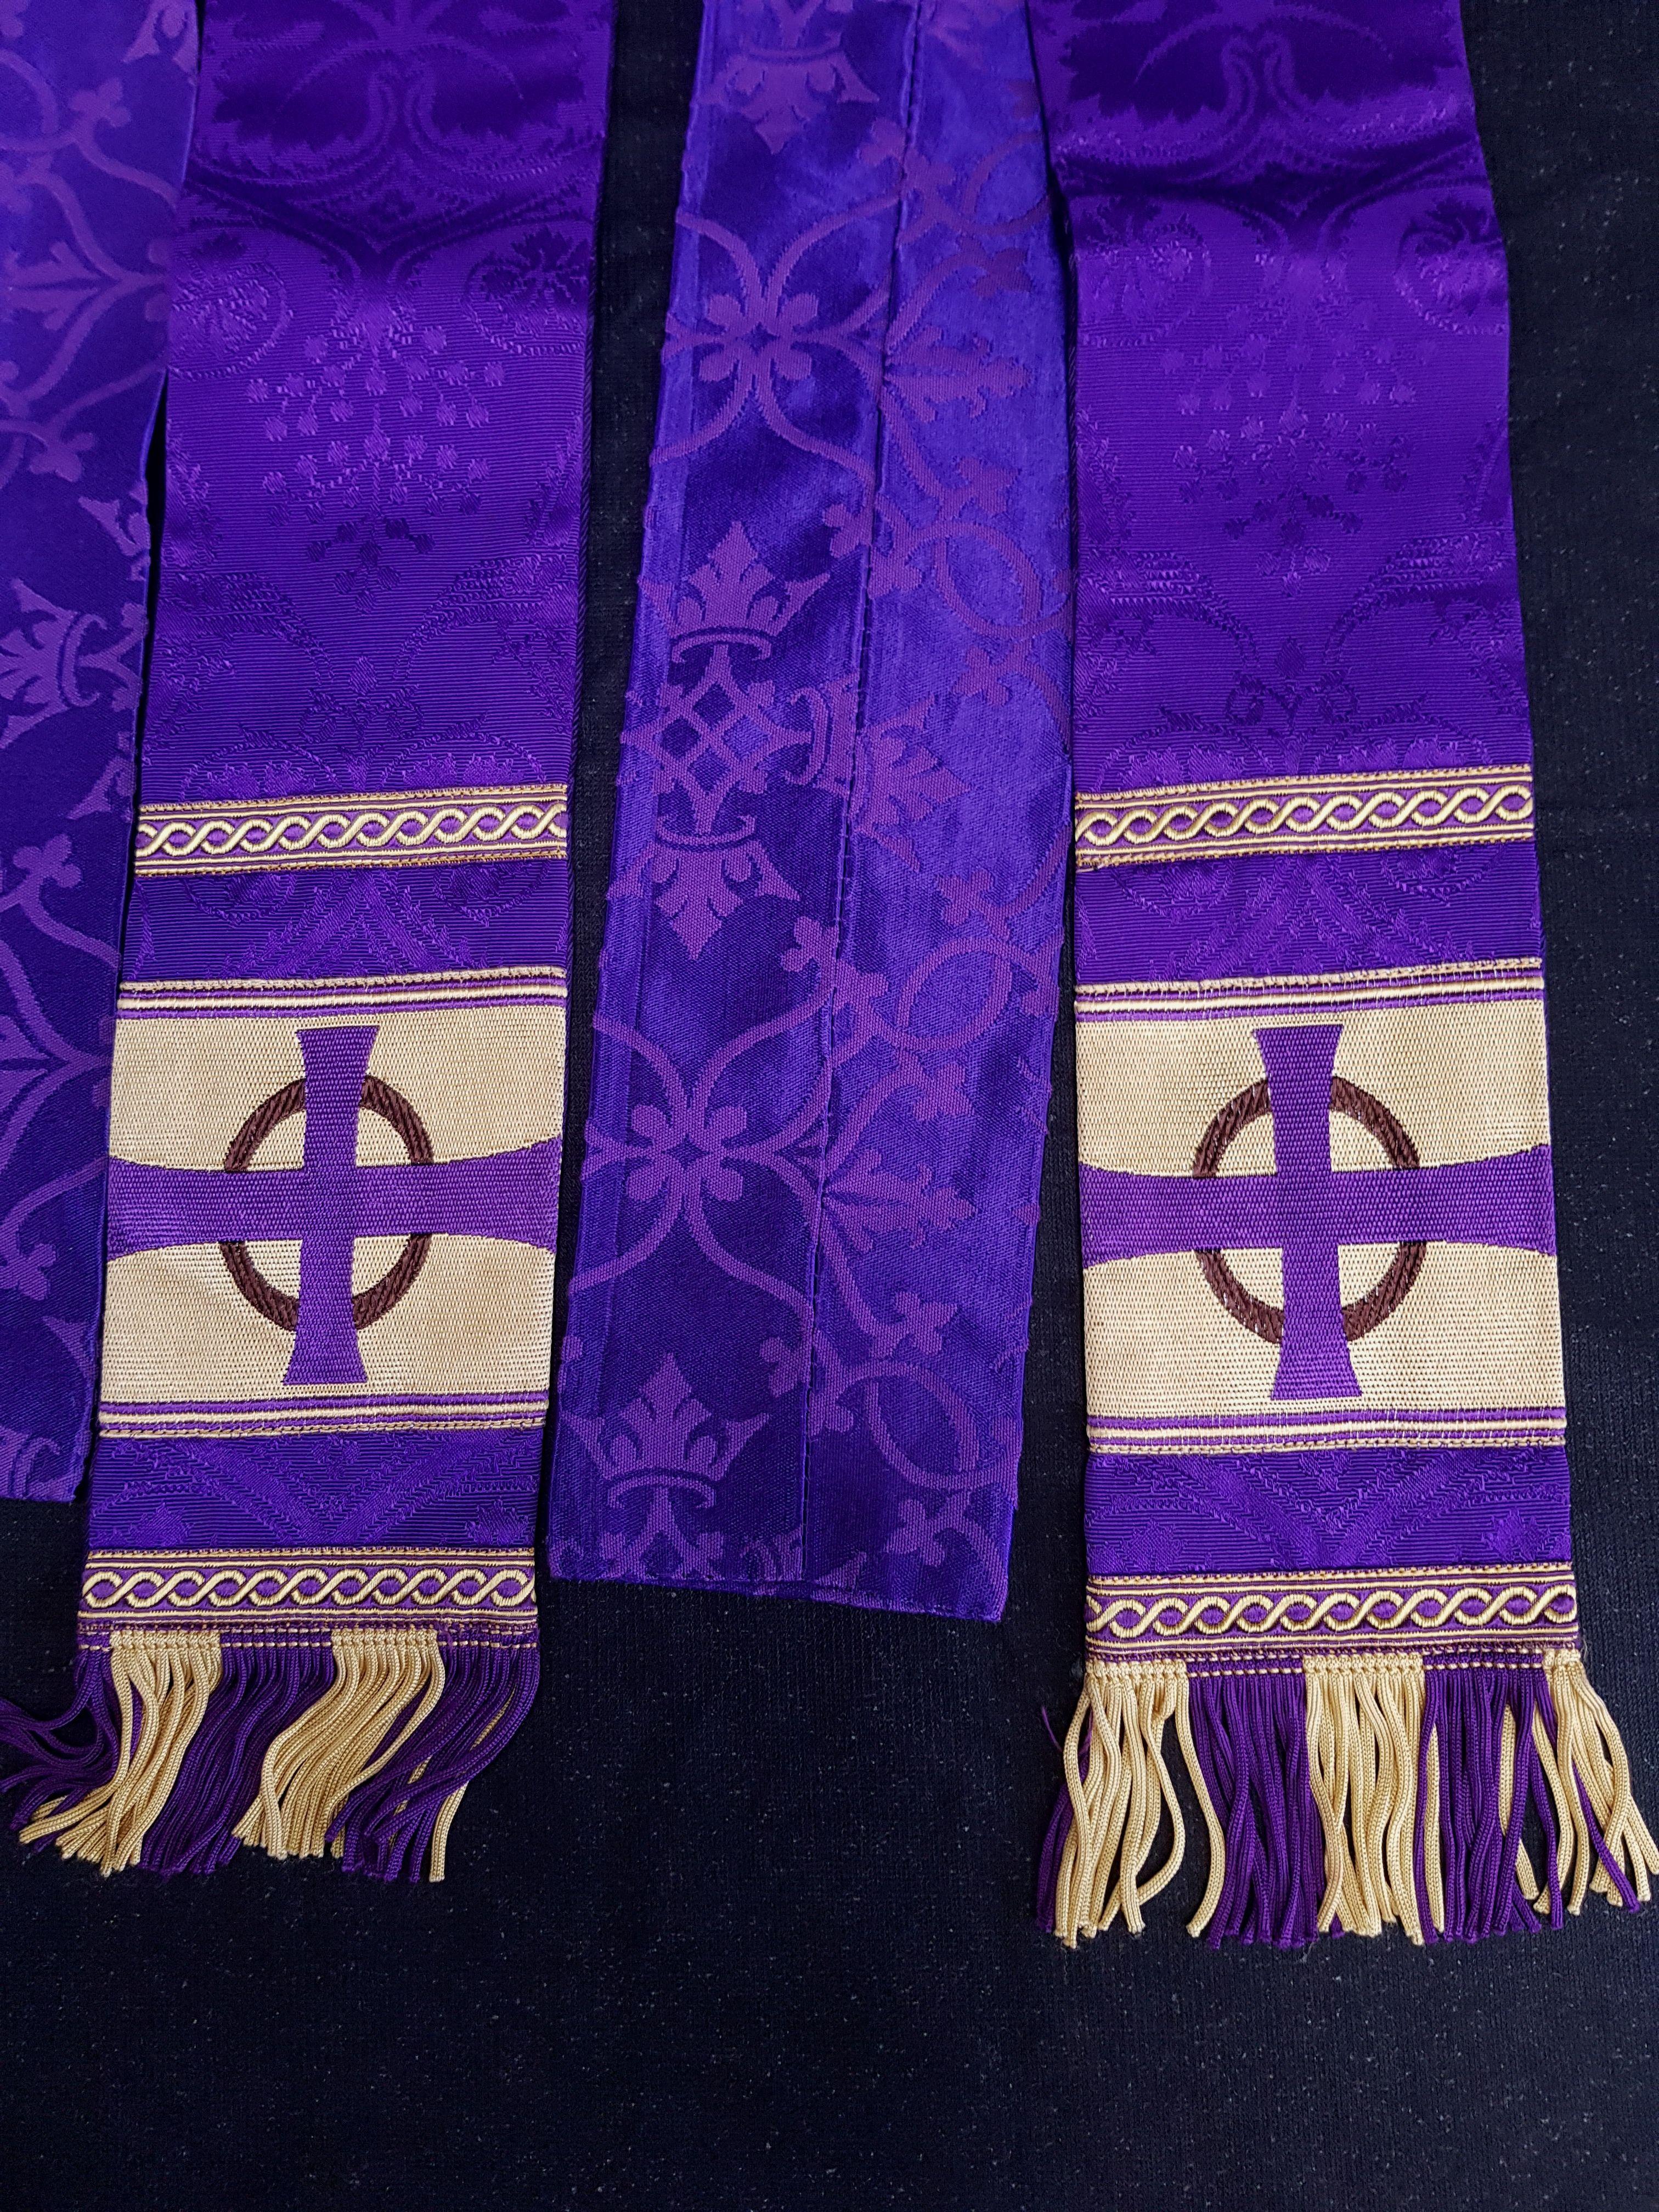 Purple and Gold Church Logo - Purple and Yellow Gold Stole - Antique Church Furnishings